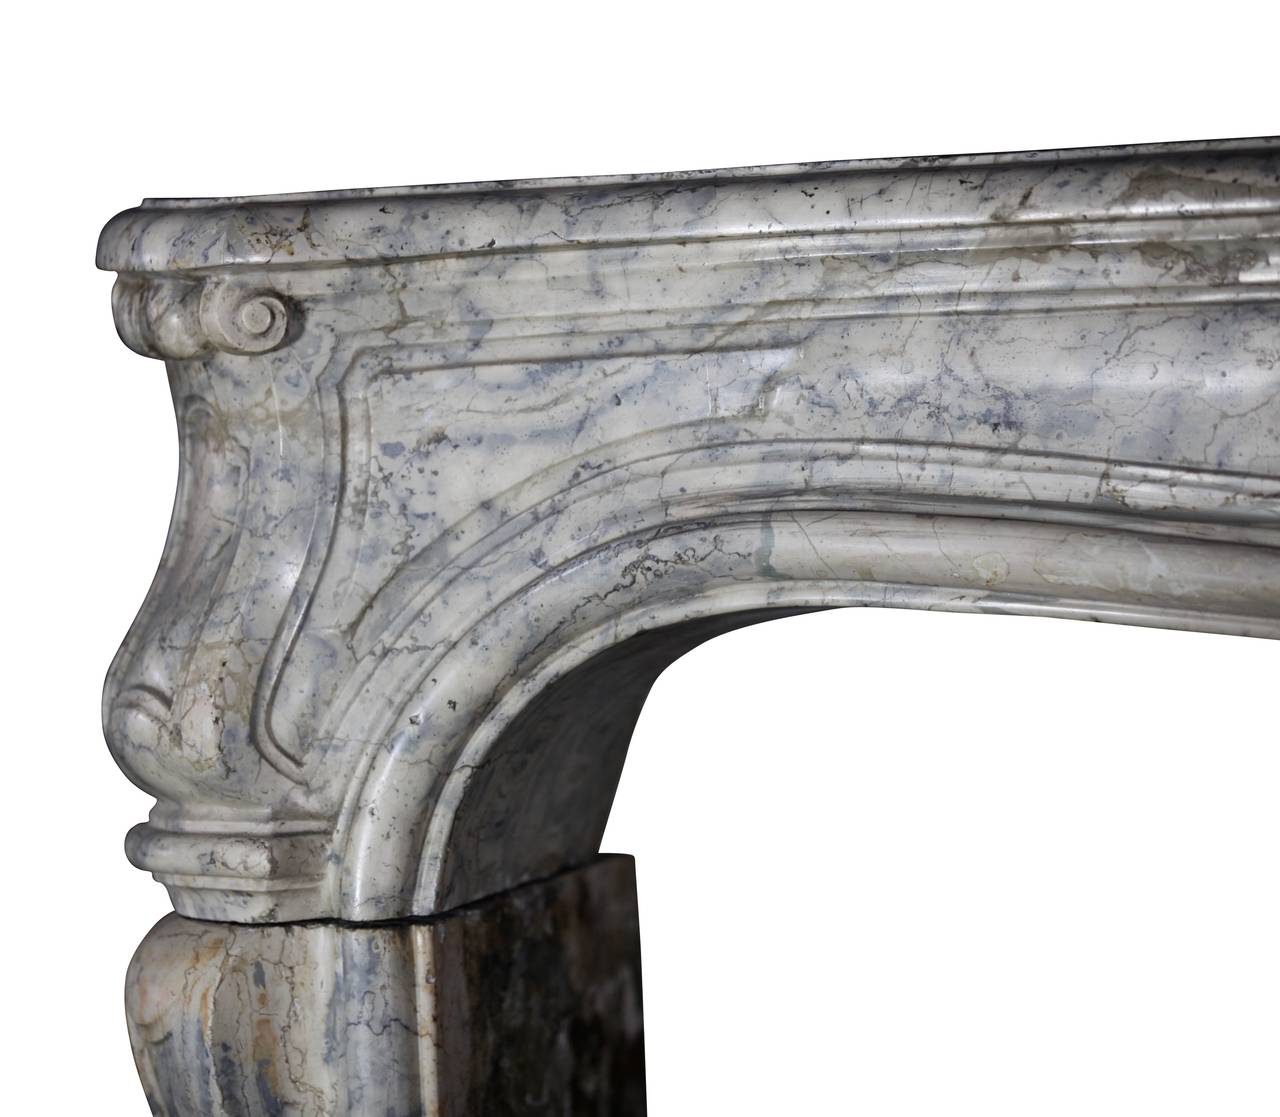 This is a very unique marble-hardstone original antique fireplace surround. The hardness of the stone reflects the light in the room. Only a few mantels were carved out of this kind of marble. All of the mantels in our inventory, in this particular